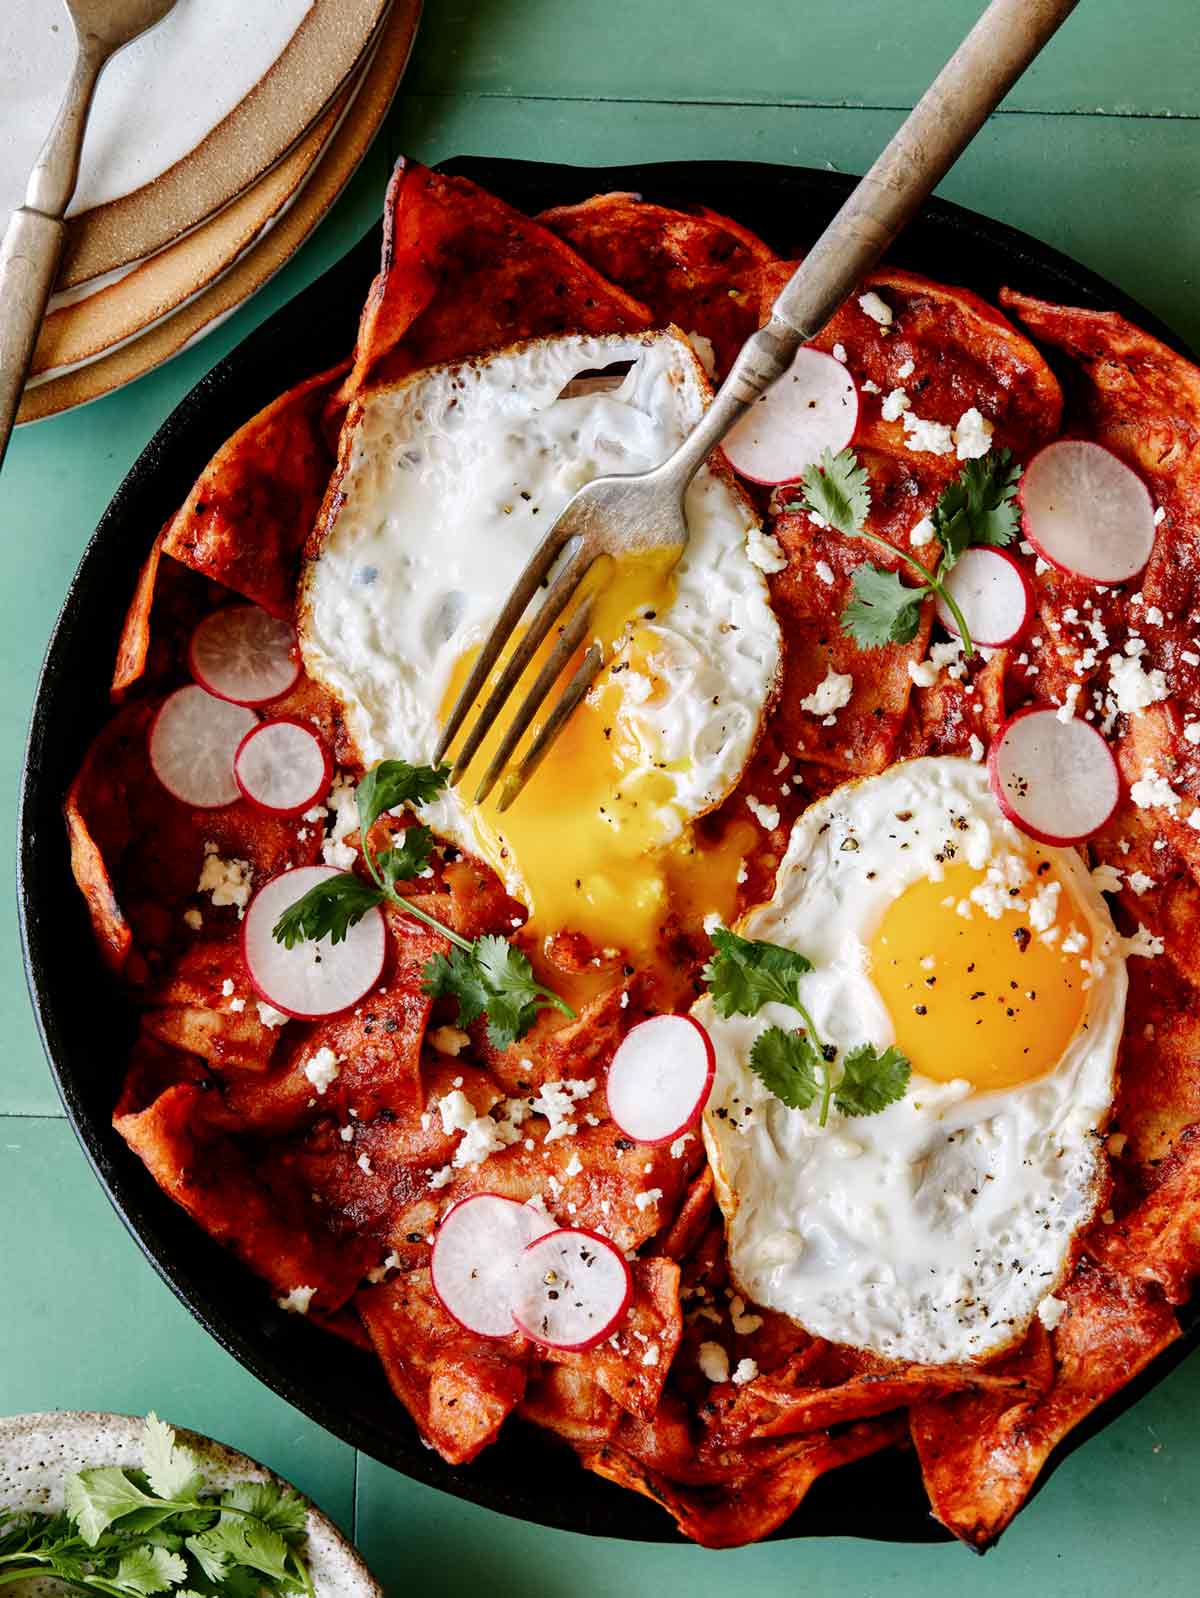 Chilaquiles Recipe Easy: Quick and Delicious Mexican Breakfast!